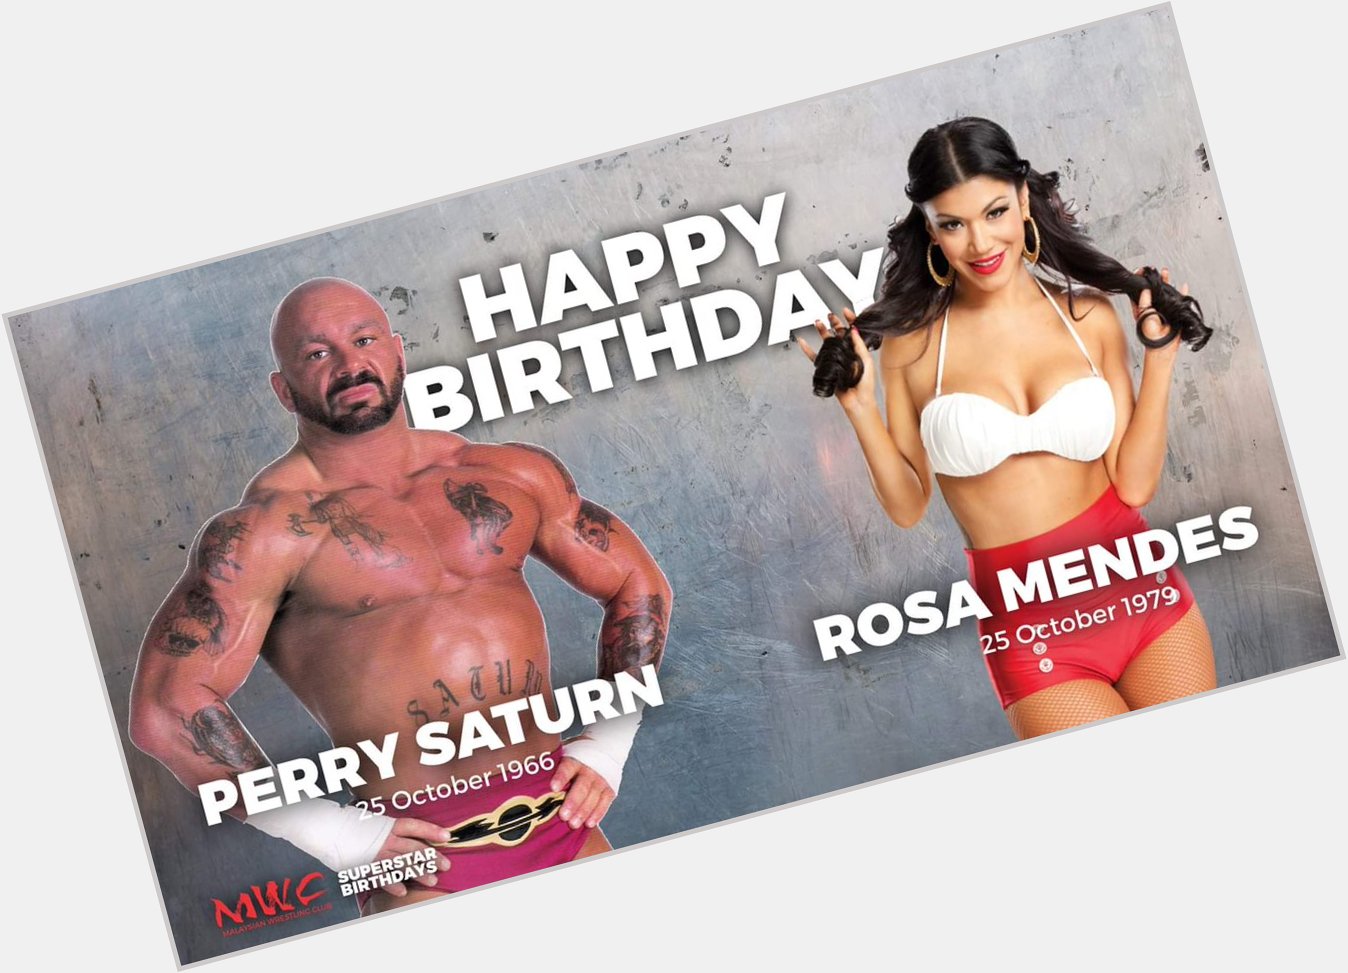 Happy Birthday to two Former WWE Superstars and Rosa Mendes  